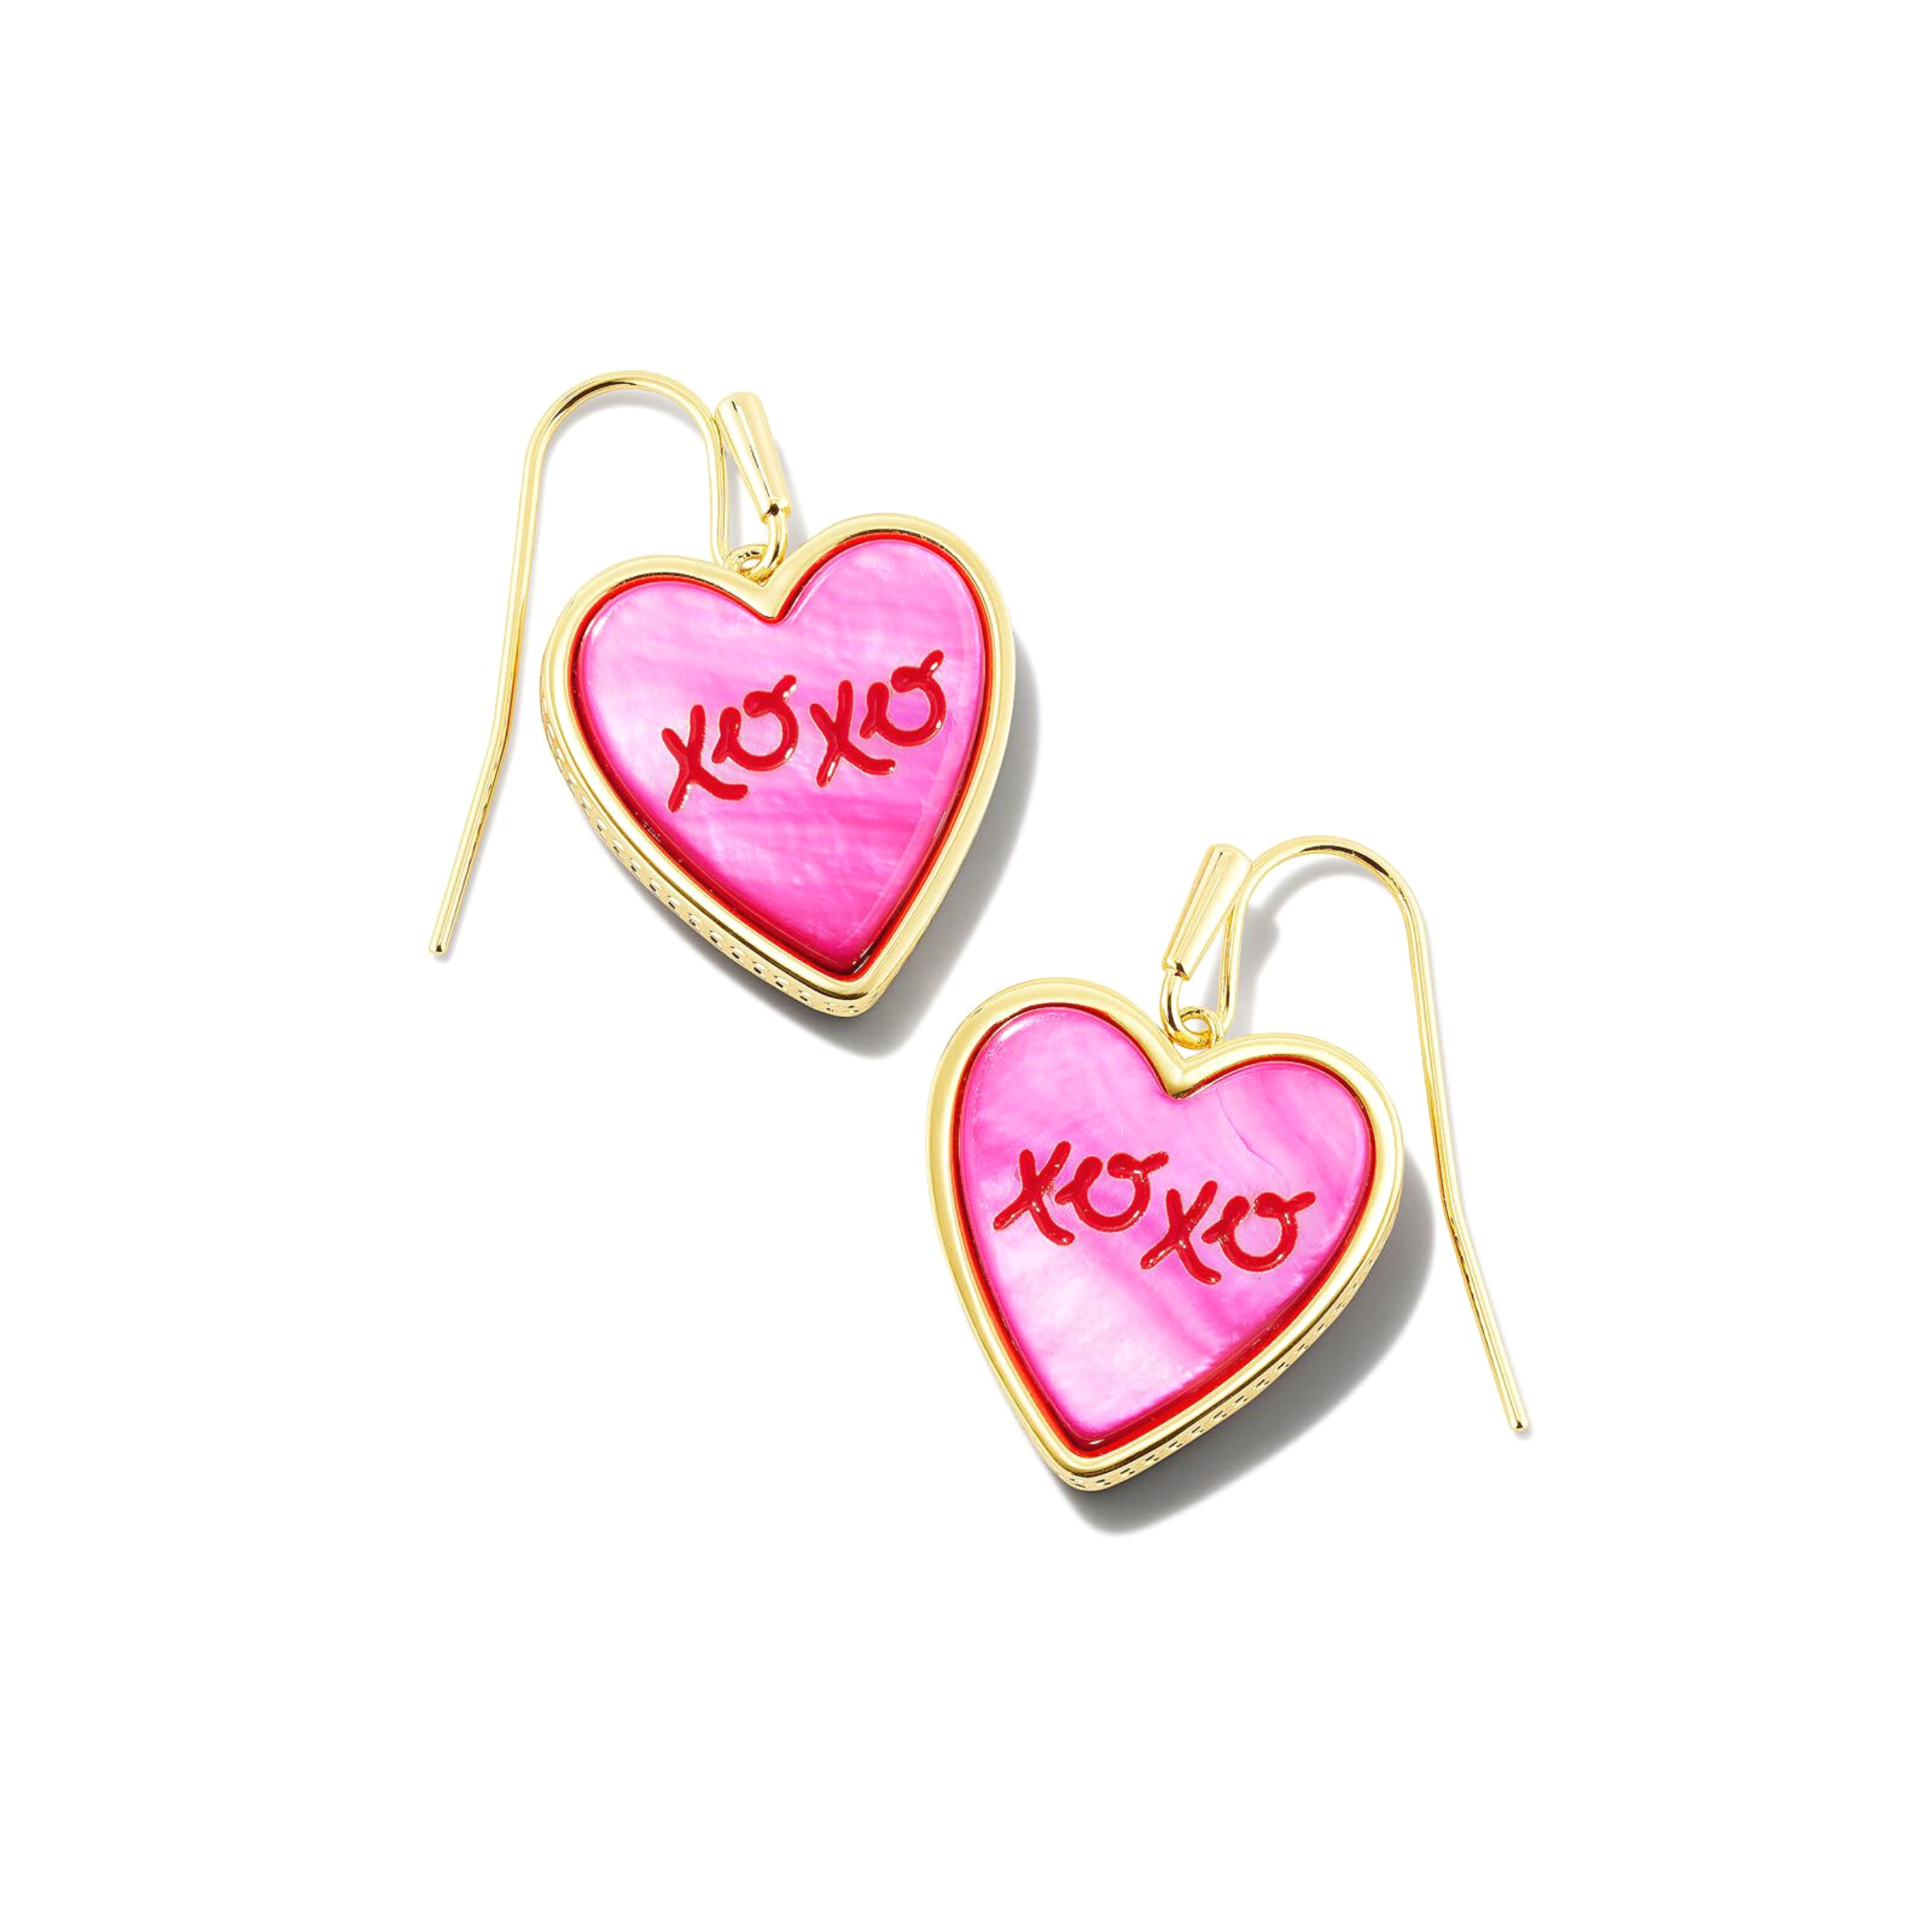 Kendra Scott | XOXO Heart Gold Drop Earrings in Hot Pink Mother of Pearl - Giddy Up Glamour Boutique